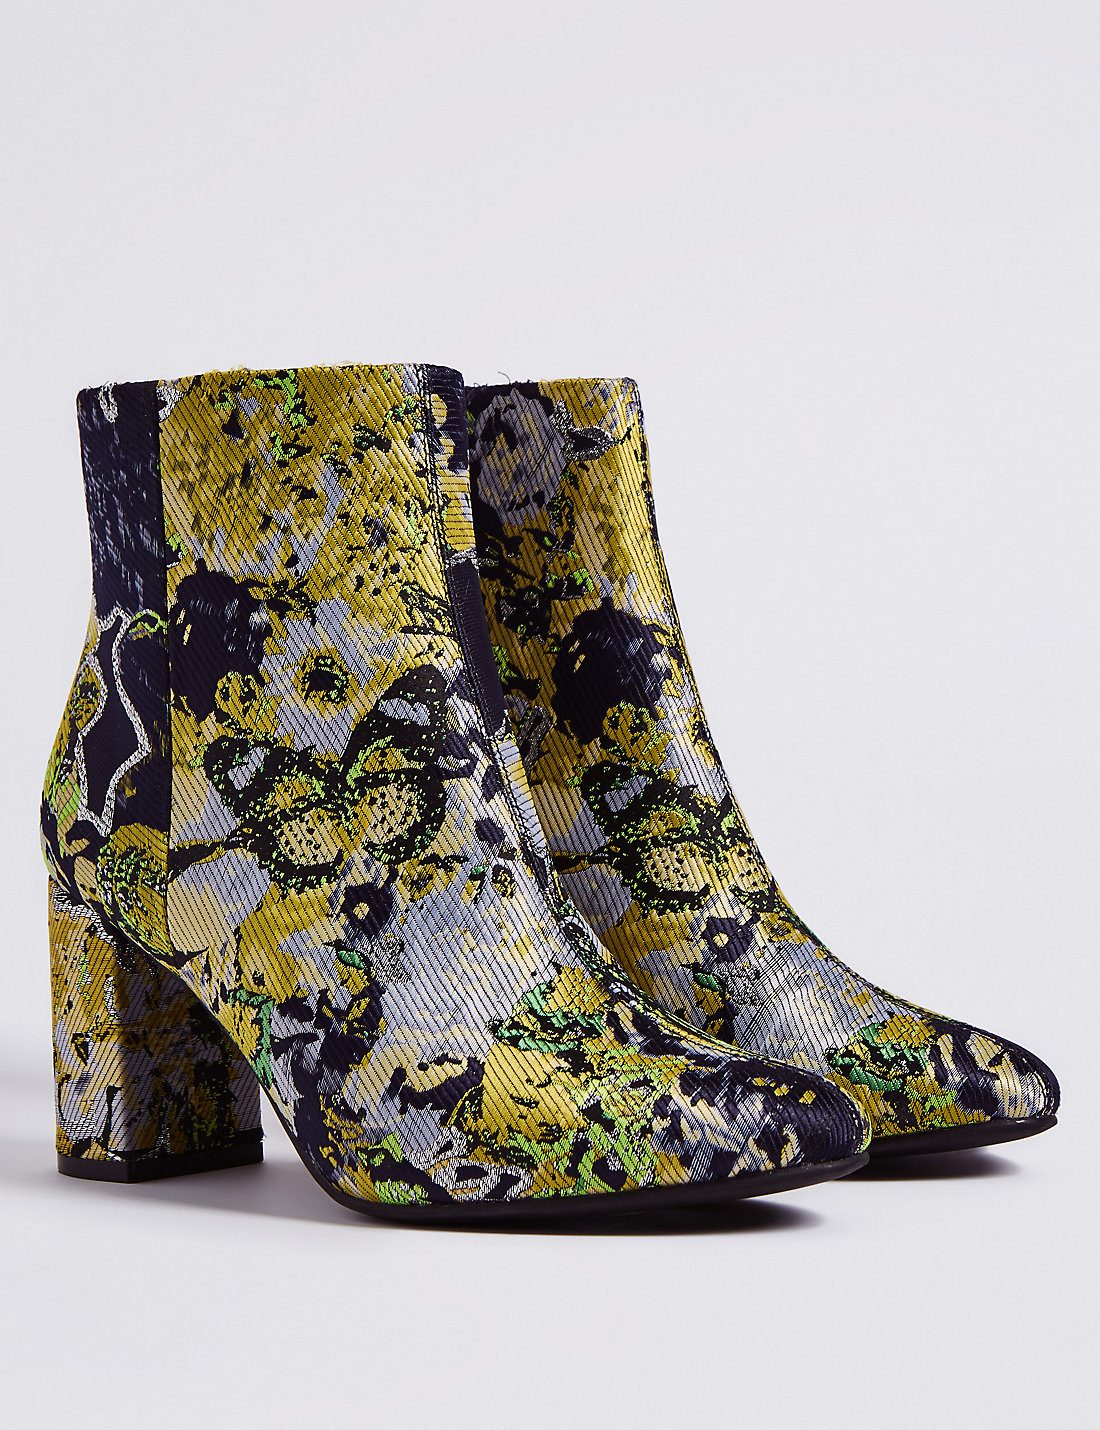 Upgrade your spring wardrobe with one of these six colourful boots fashion,boots,shoes,Upgrade your spring wardrobe,colourful boots